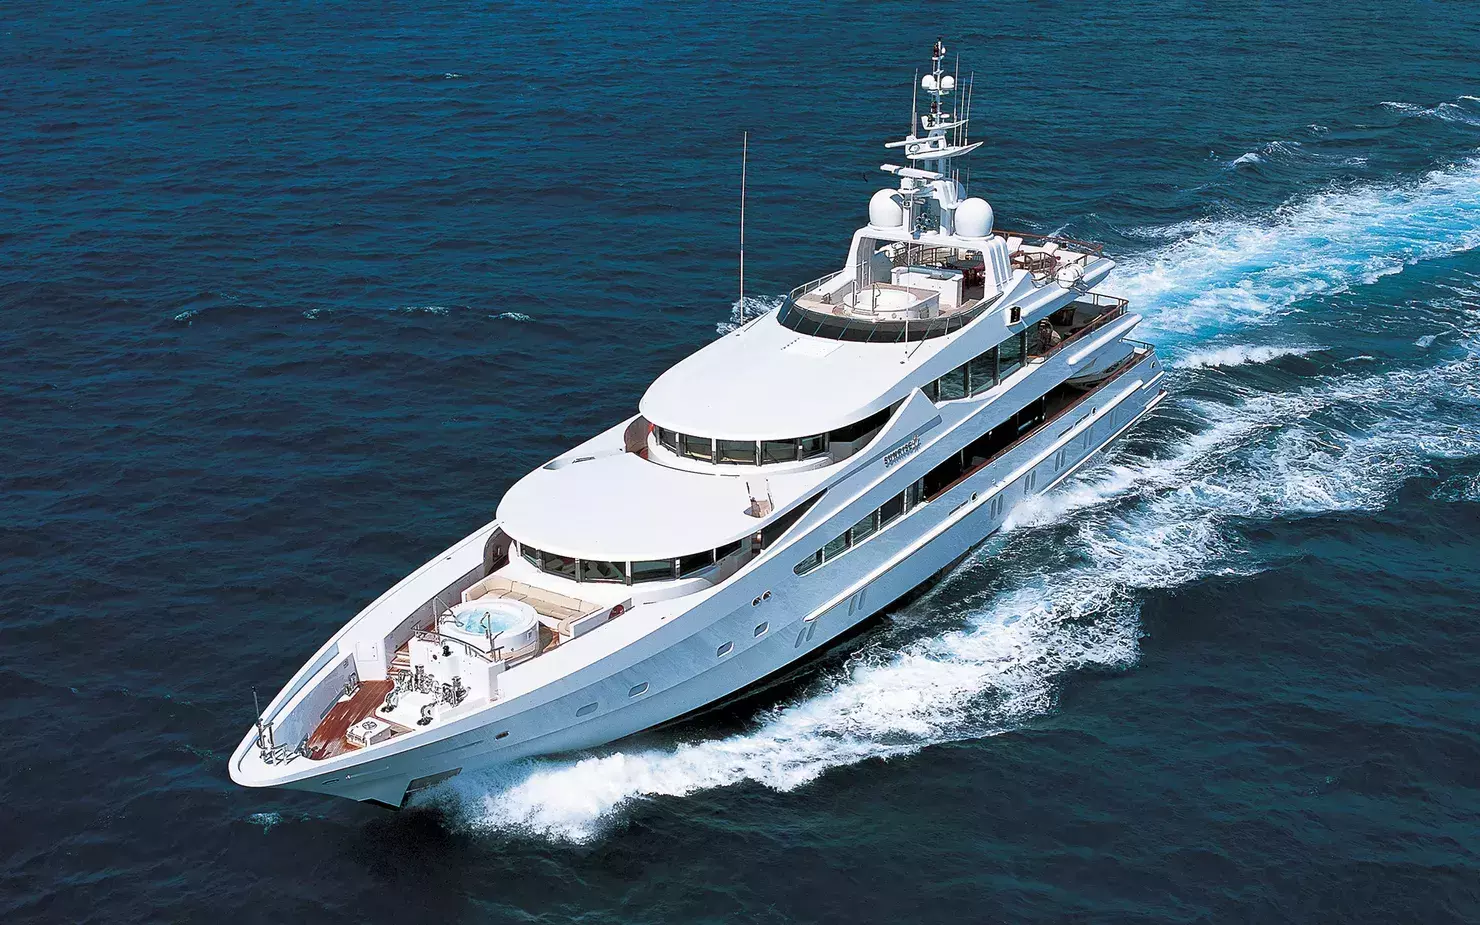 Friendship by Oceanco - Top rates for a Rental of a private Superyacht in France